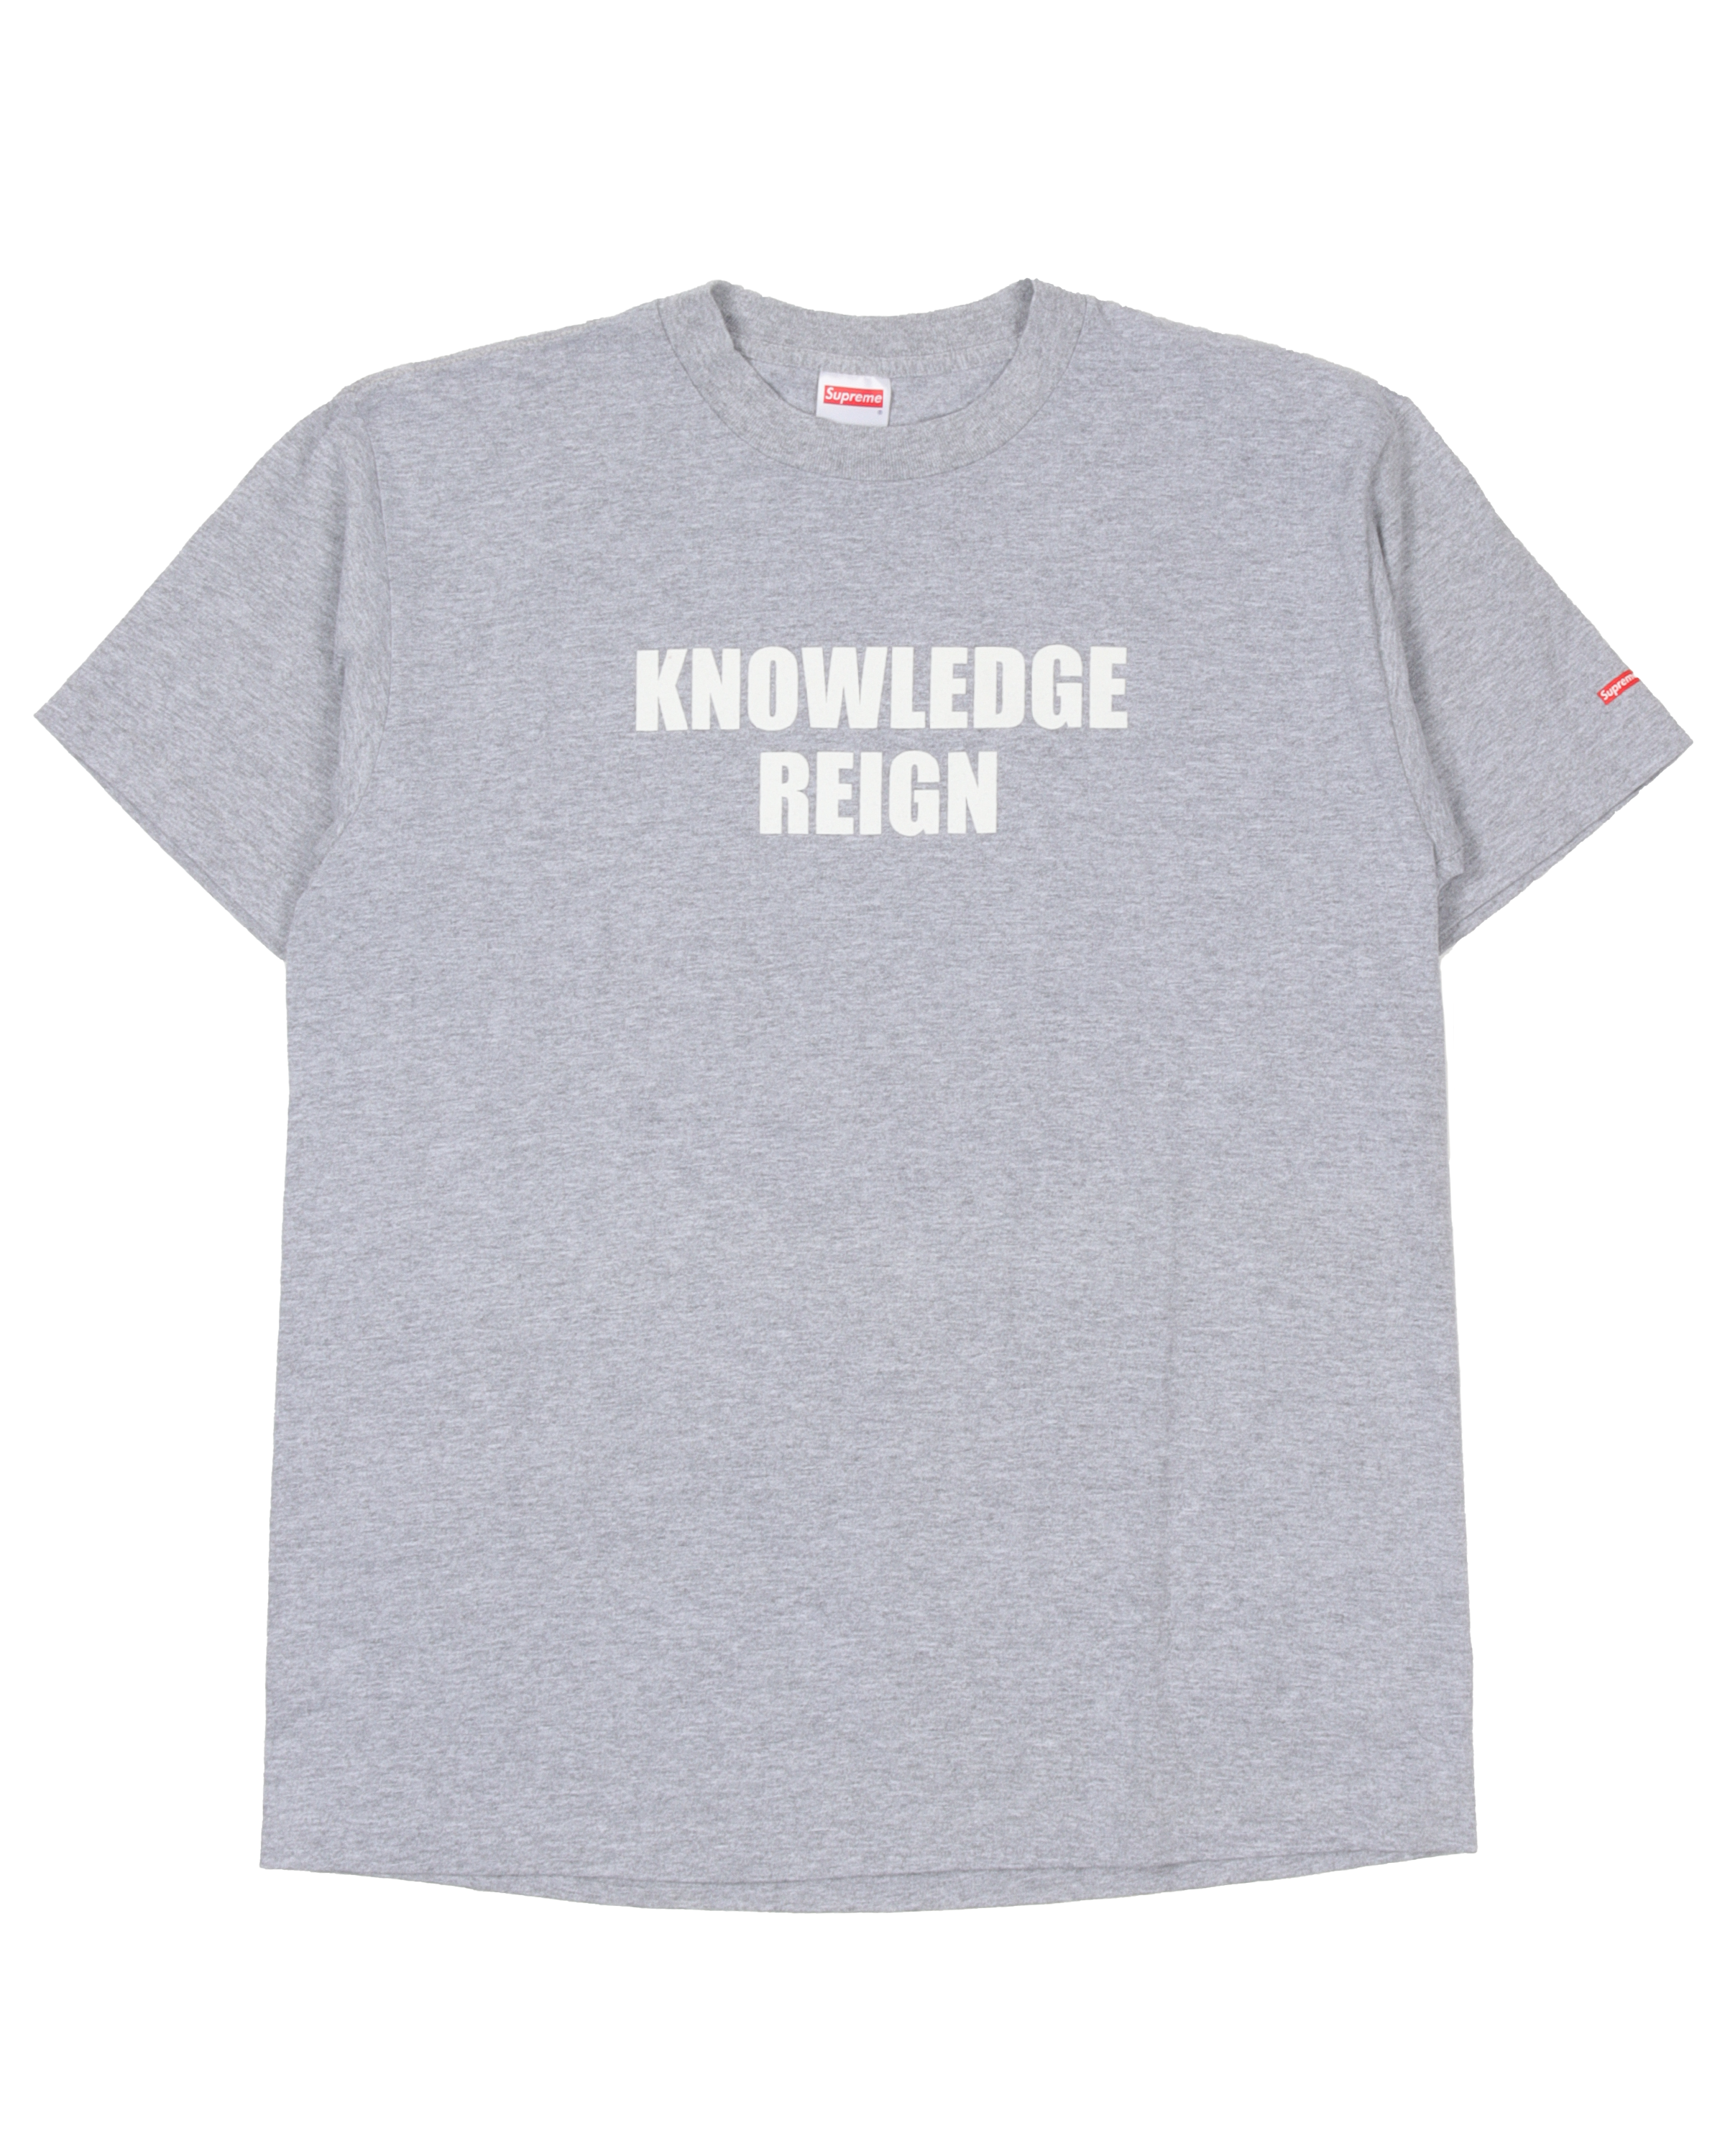 Products  Reign Supreme Clothing